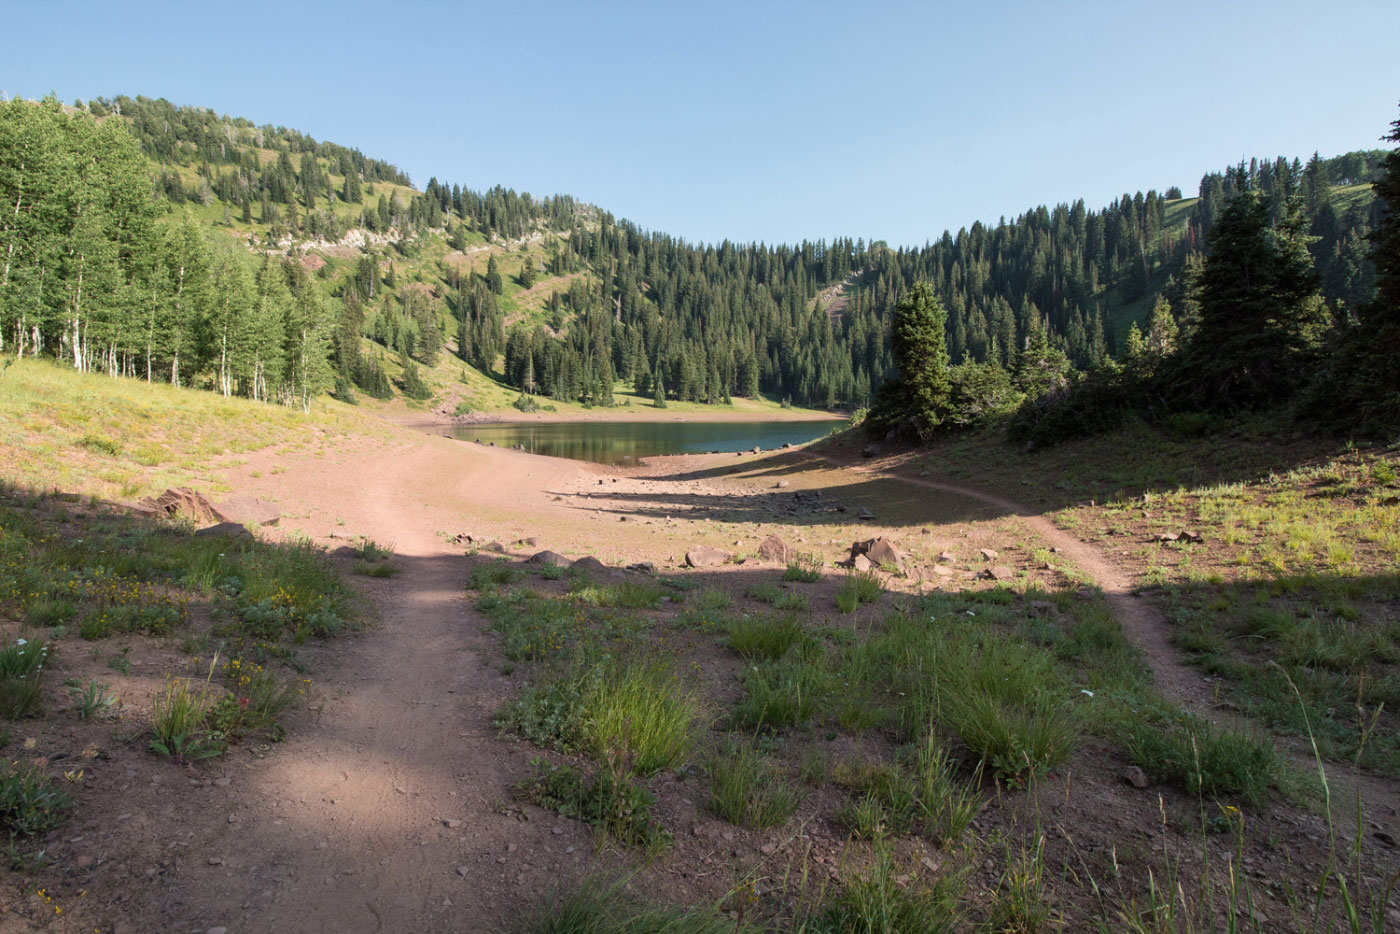 Hike Dog Lake and Desolation Lake in Wasatch-Cache National Forest, Utah - Stav is Lost